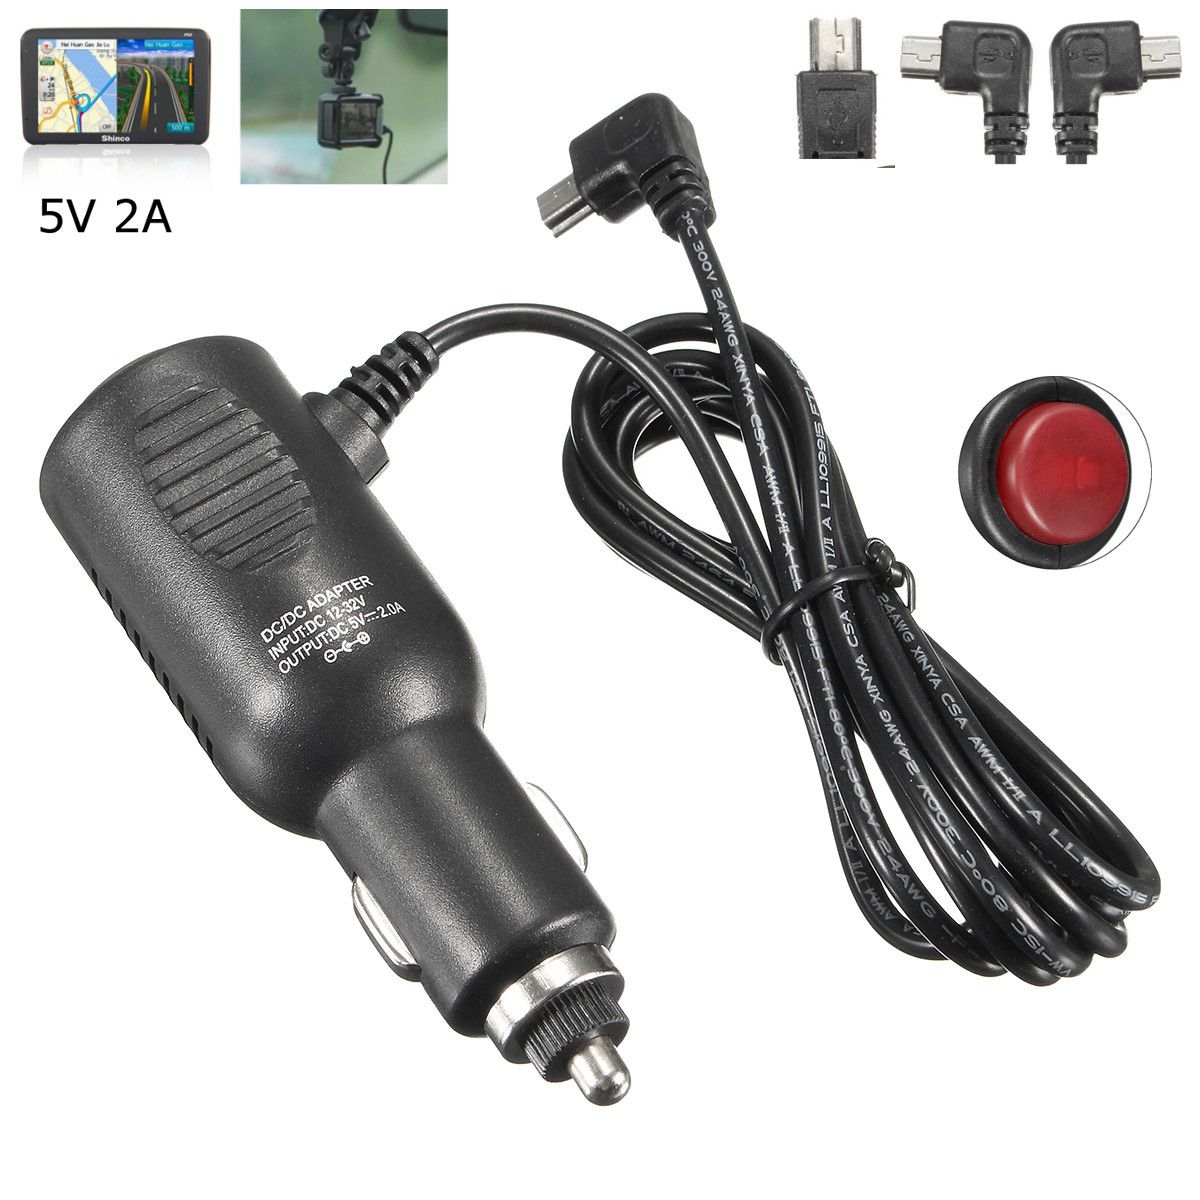 5V-2A-Mini-USB-Vehicle-Car-Charger-Cable-Switch-For-Garmin-Nuvi-GPS-1341496